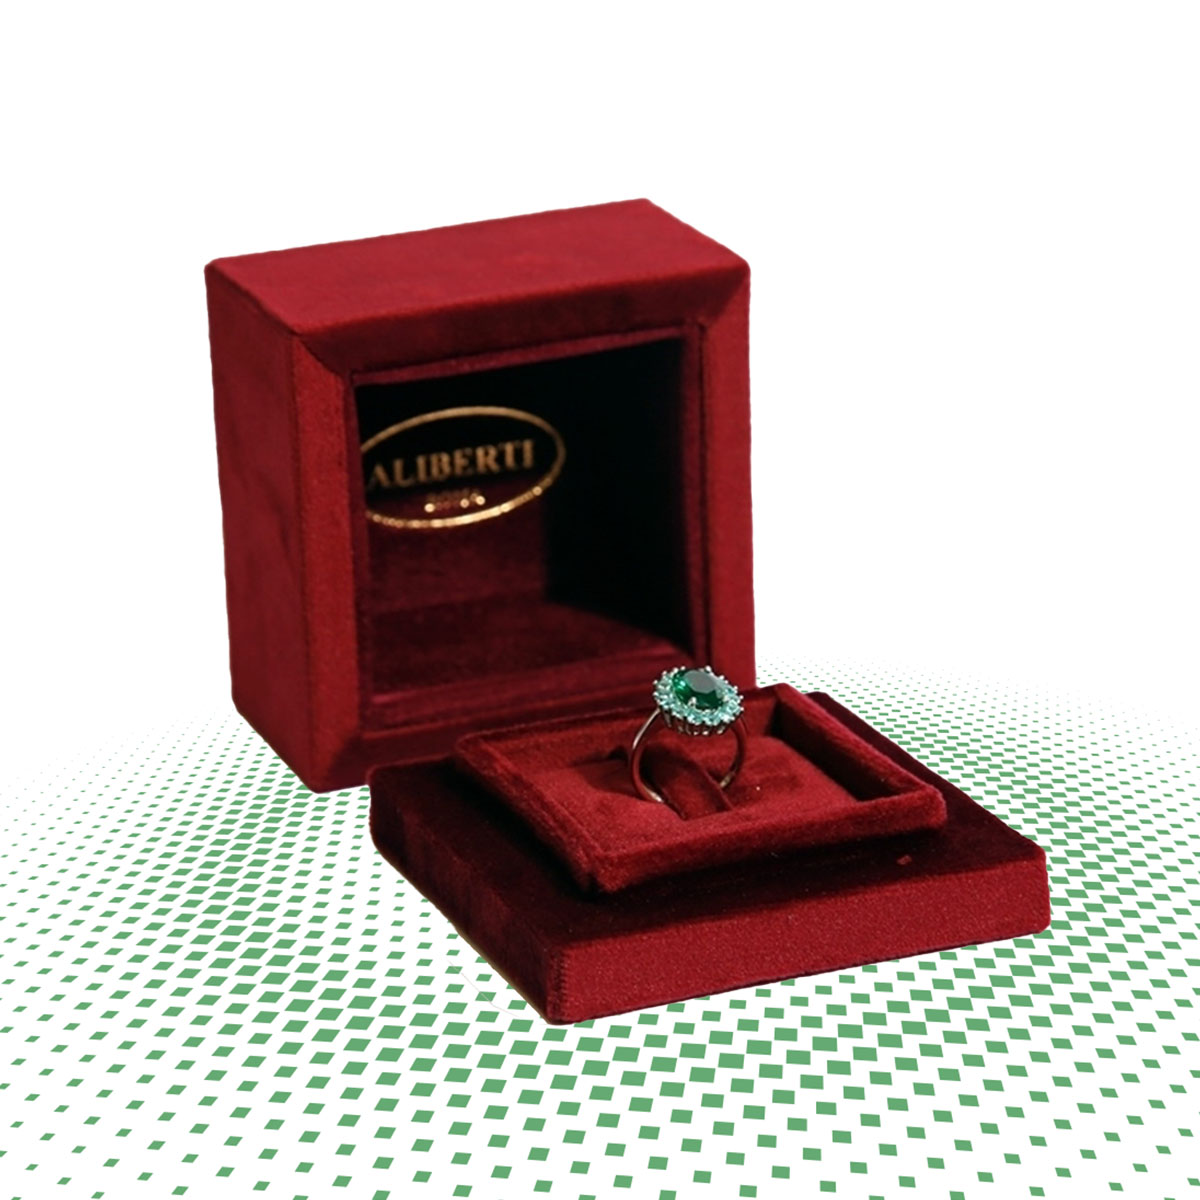 Get Custom Ring Boxes at Wholesale Prices - Texas - Arlington ID1526587